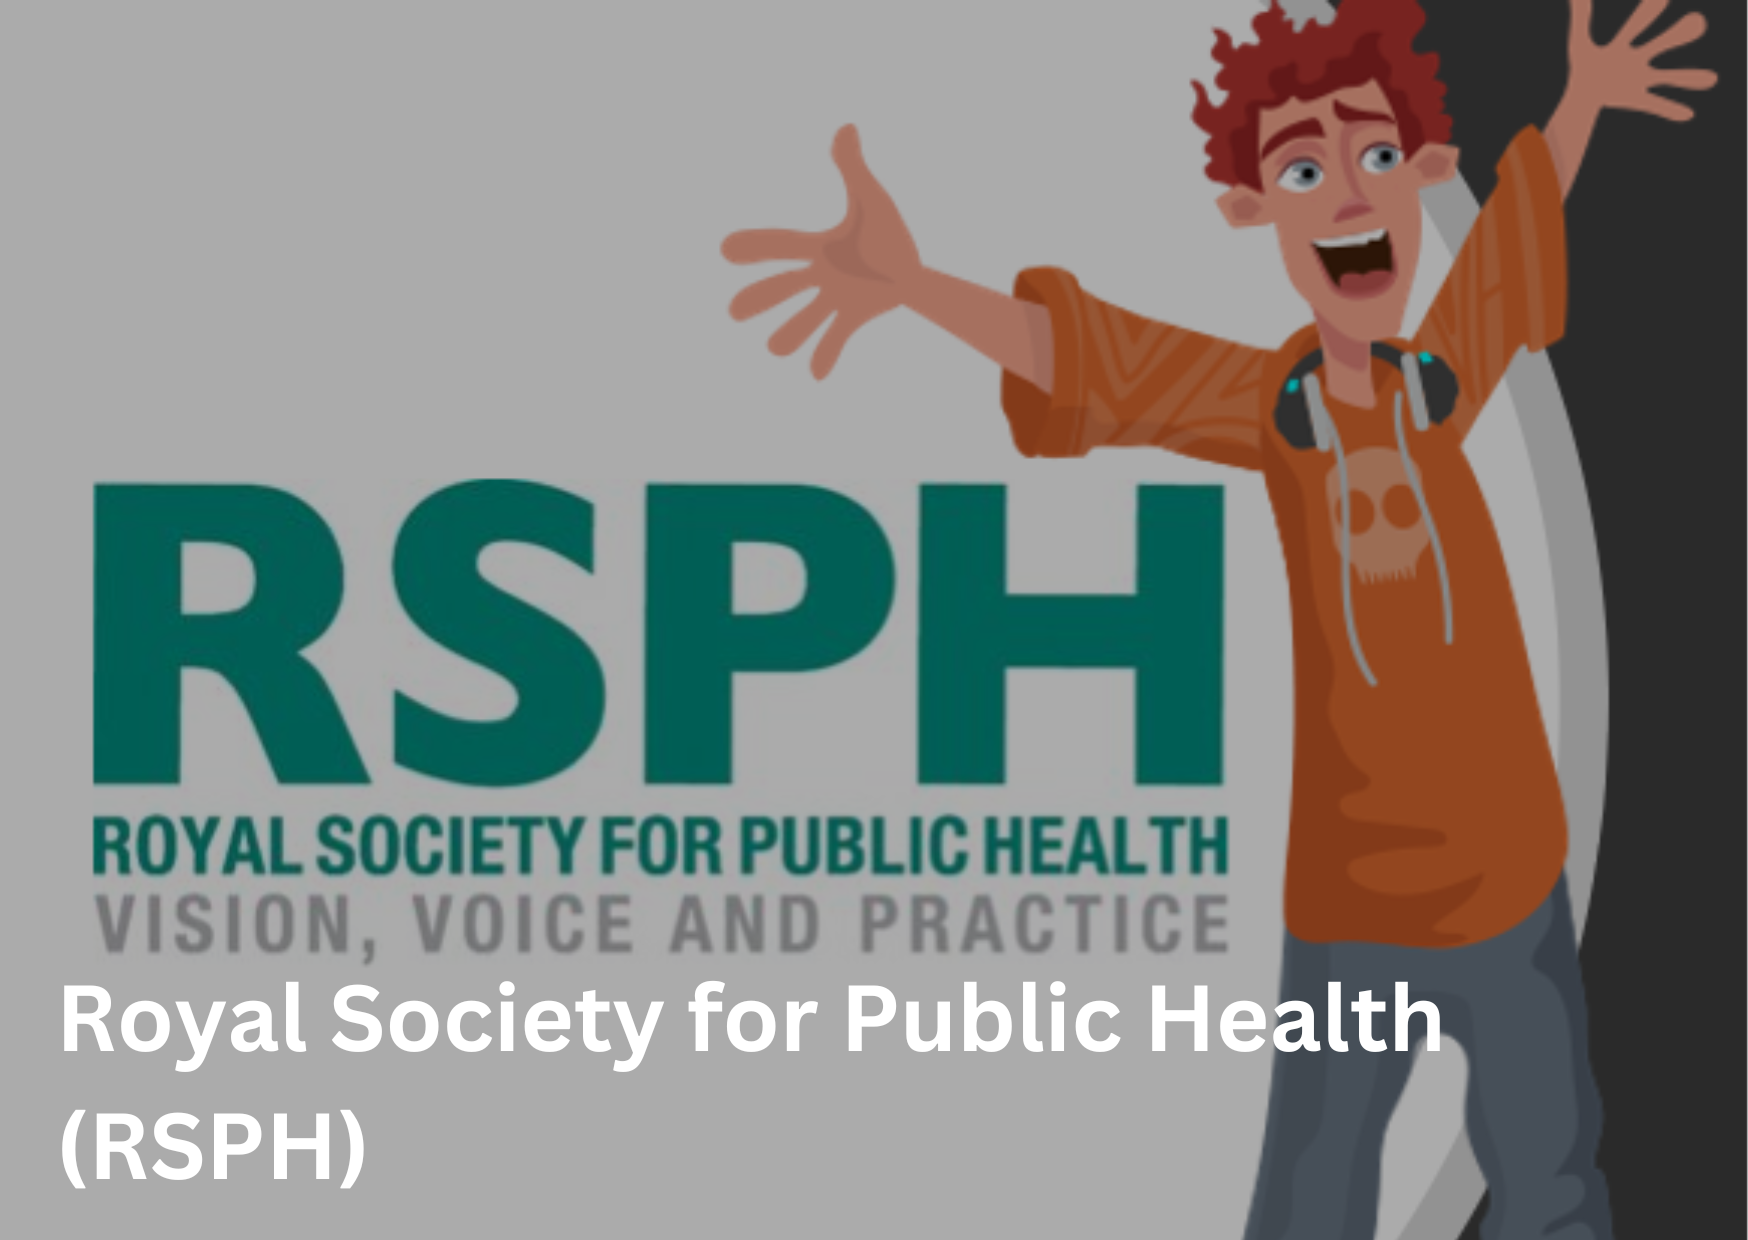 Royal Society for Public Health (RSPH)